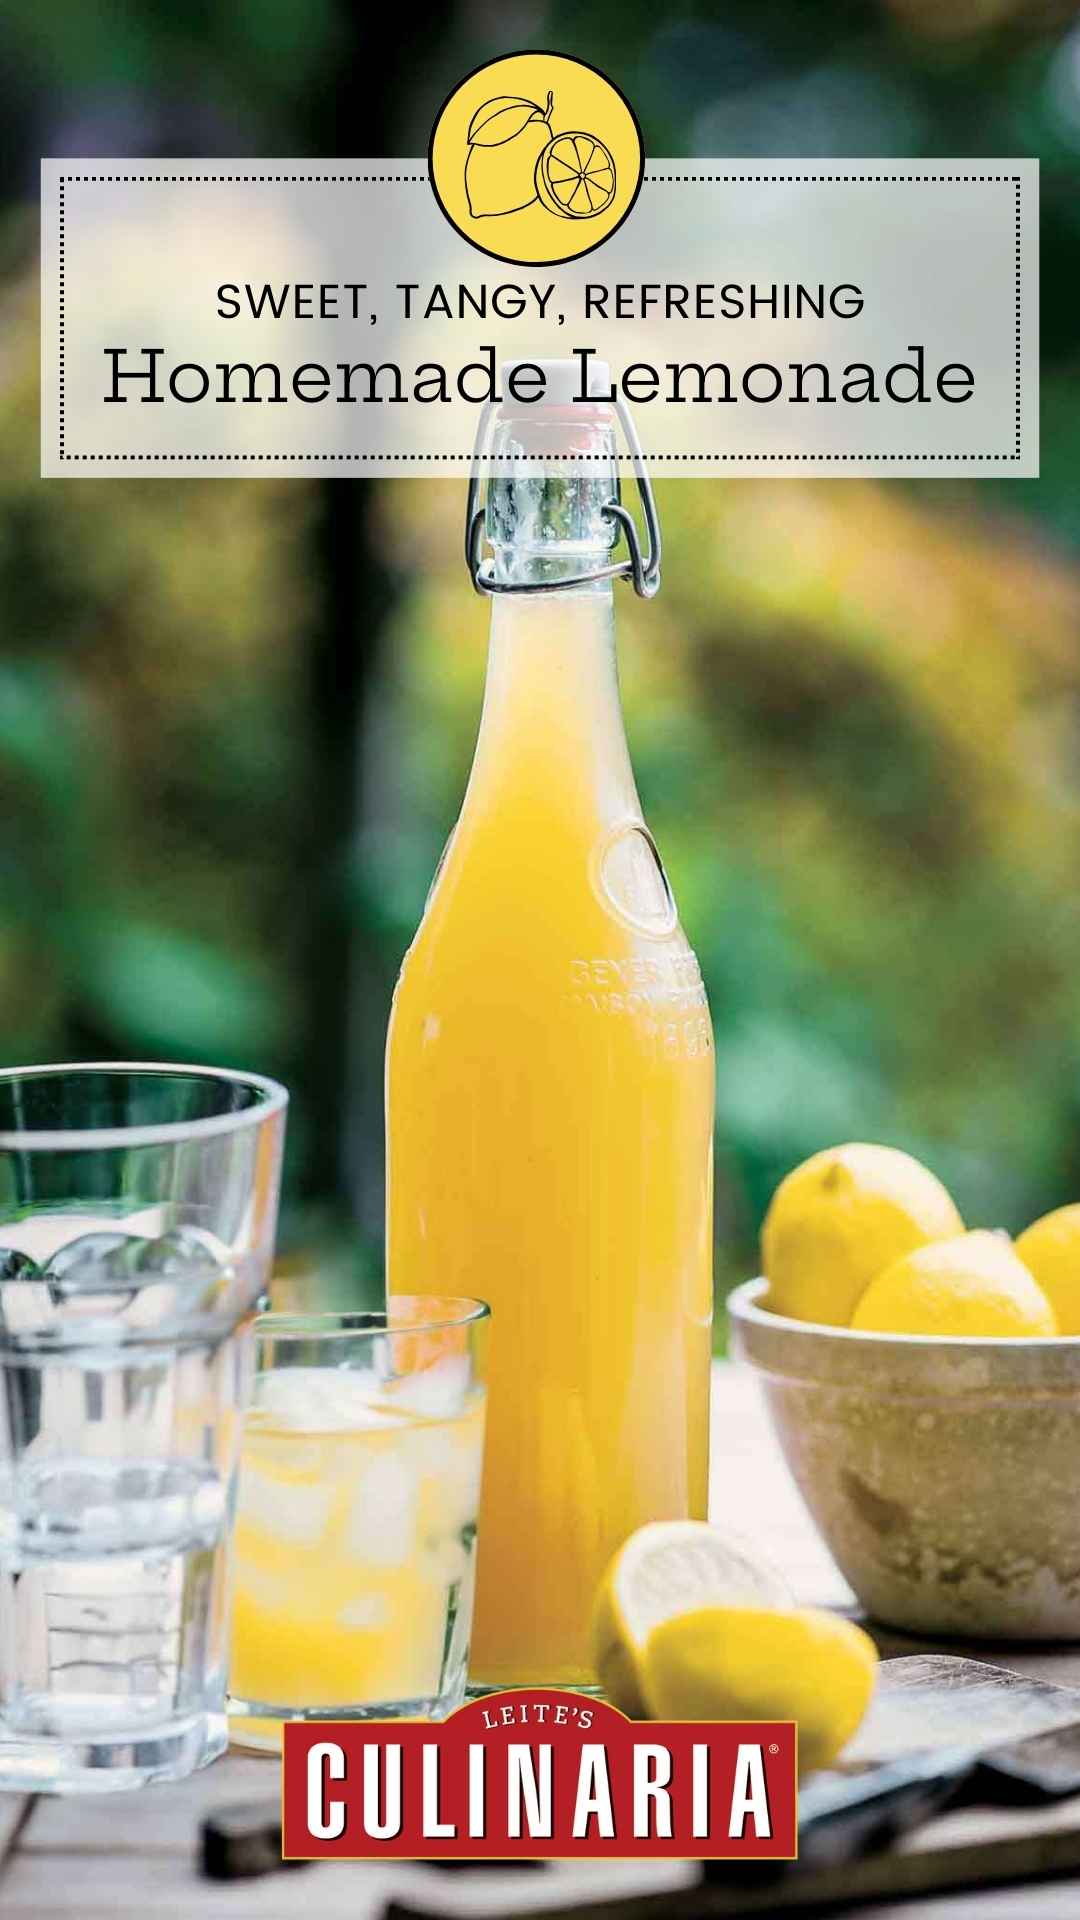 A bottle of lemon syrup with fresh lemons and a glass of lemonade nearby.